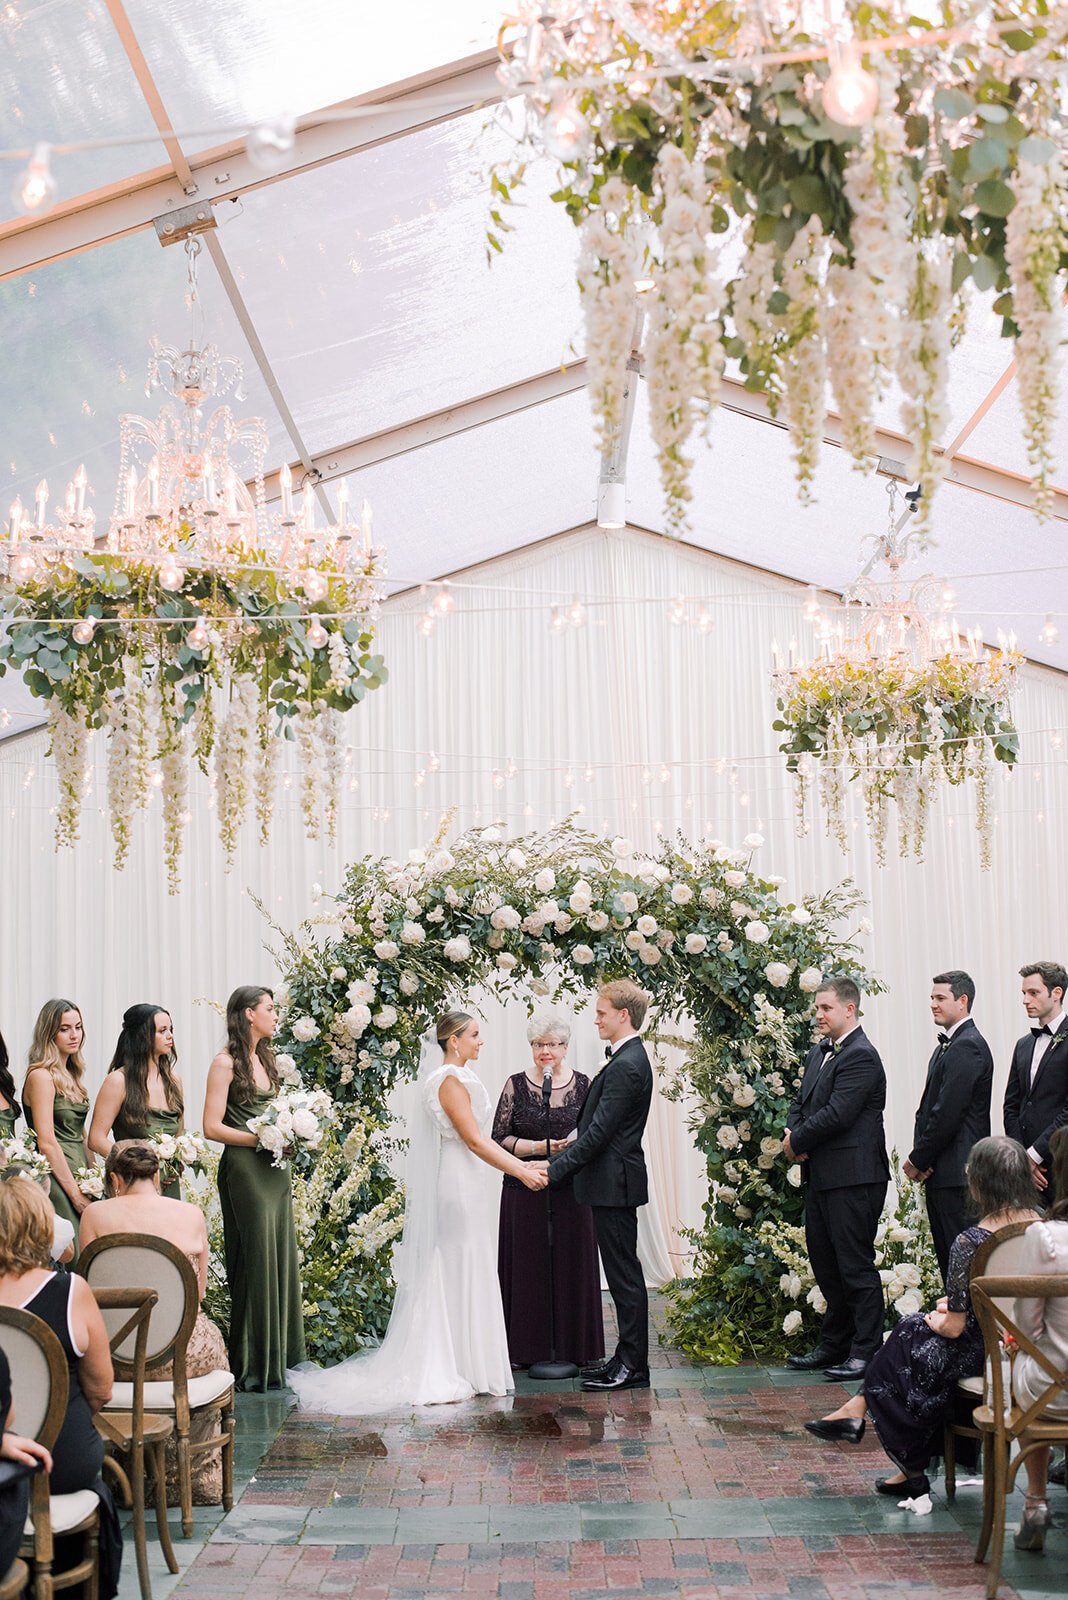 Chicago Illuminating Co. Tent Wedding with Lush Floral Arch_61